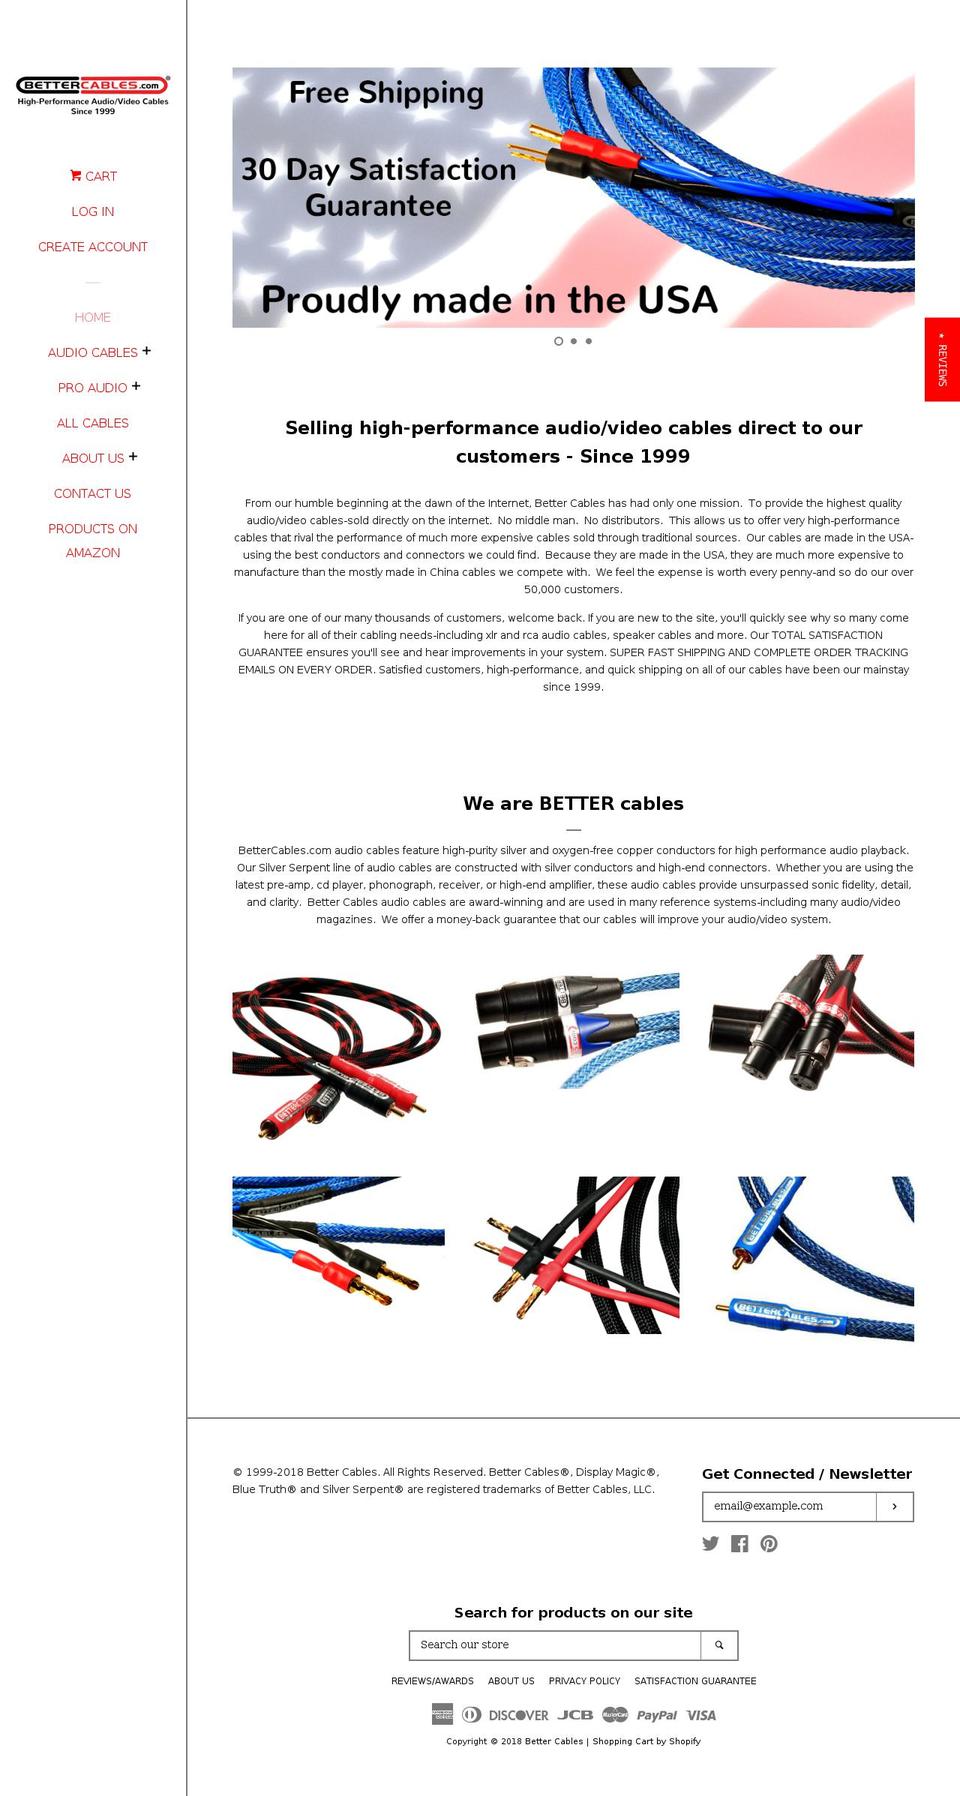 Current Theme - Pop Shopify theme site example bettercables.org